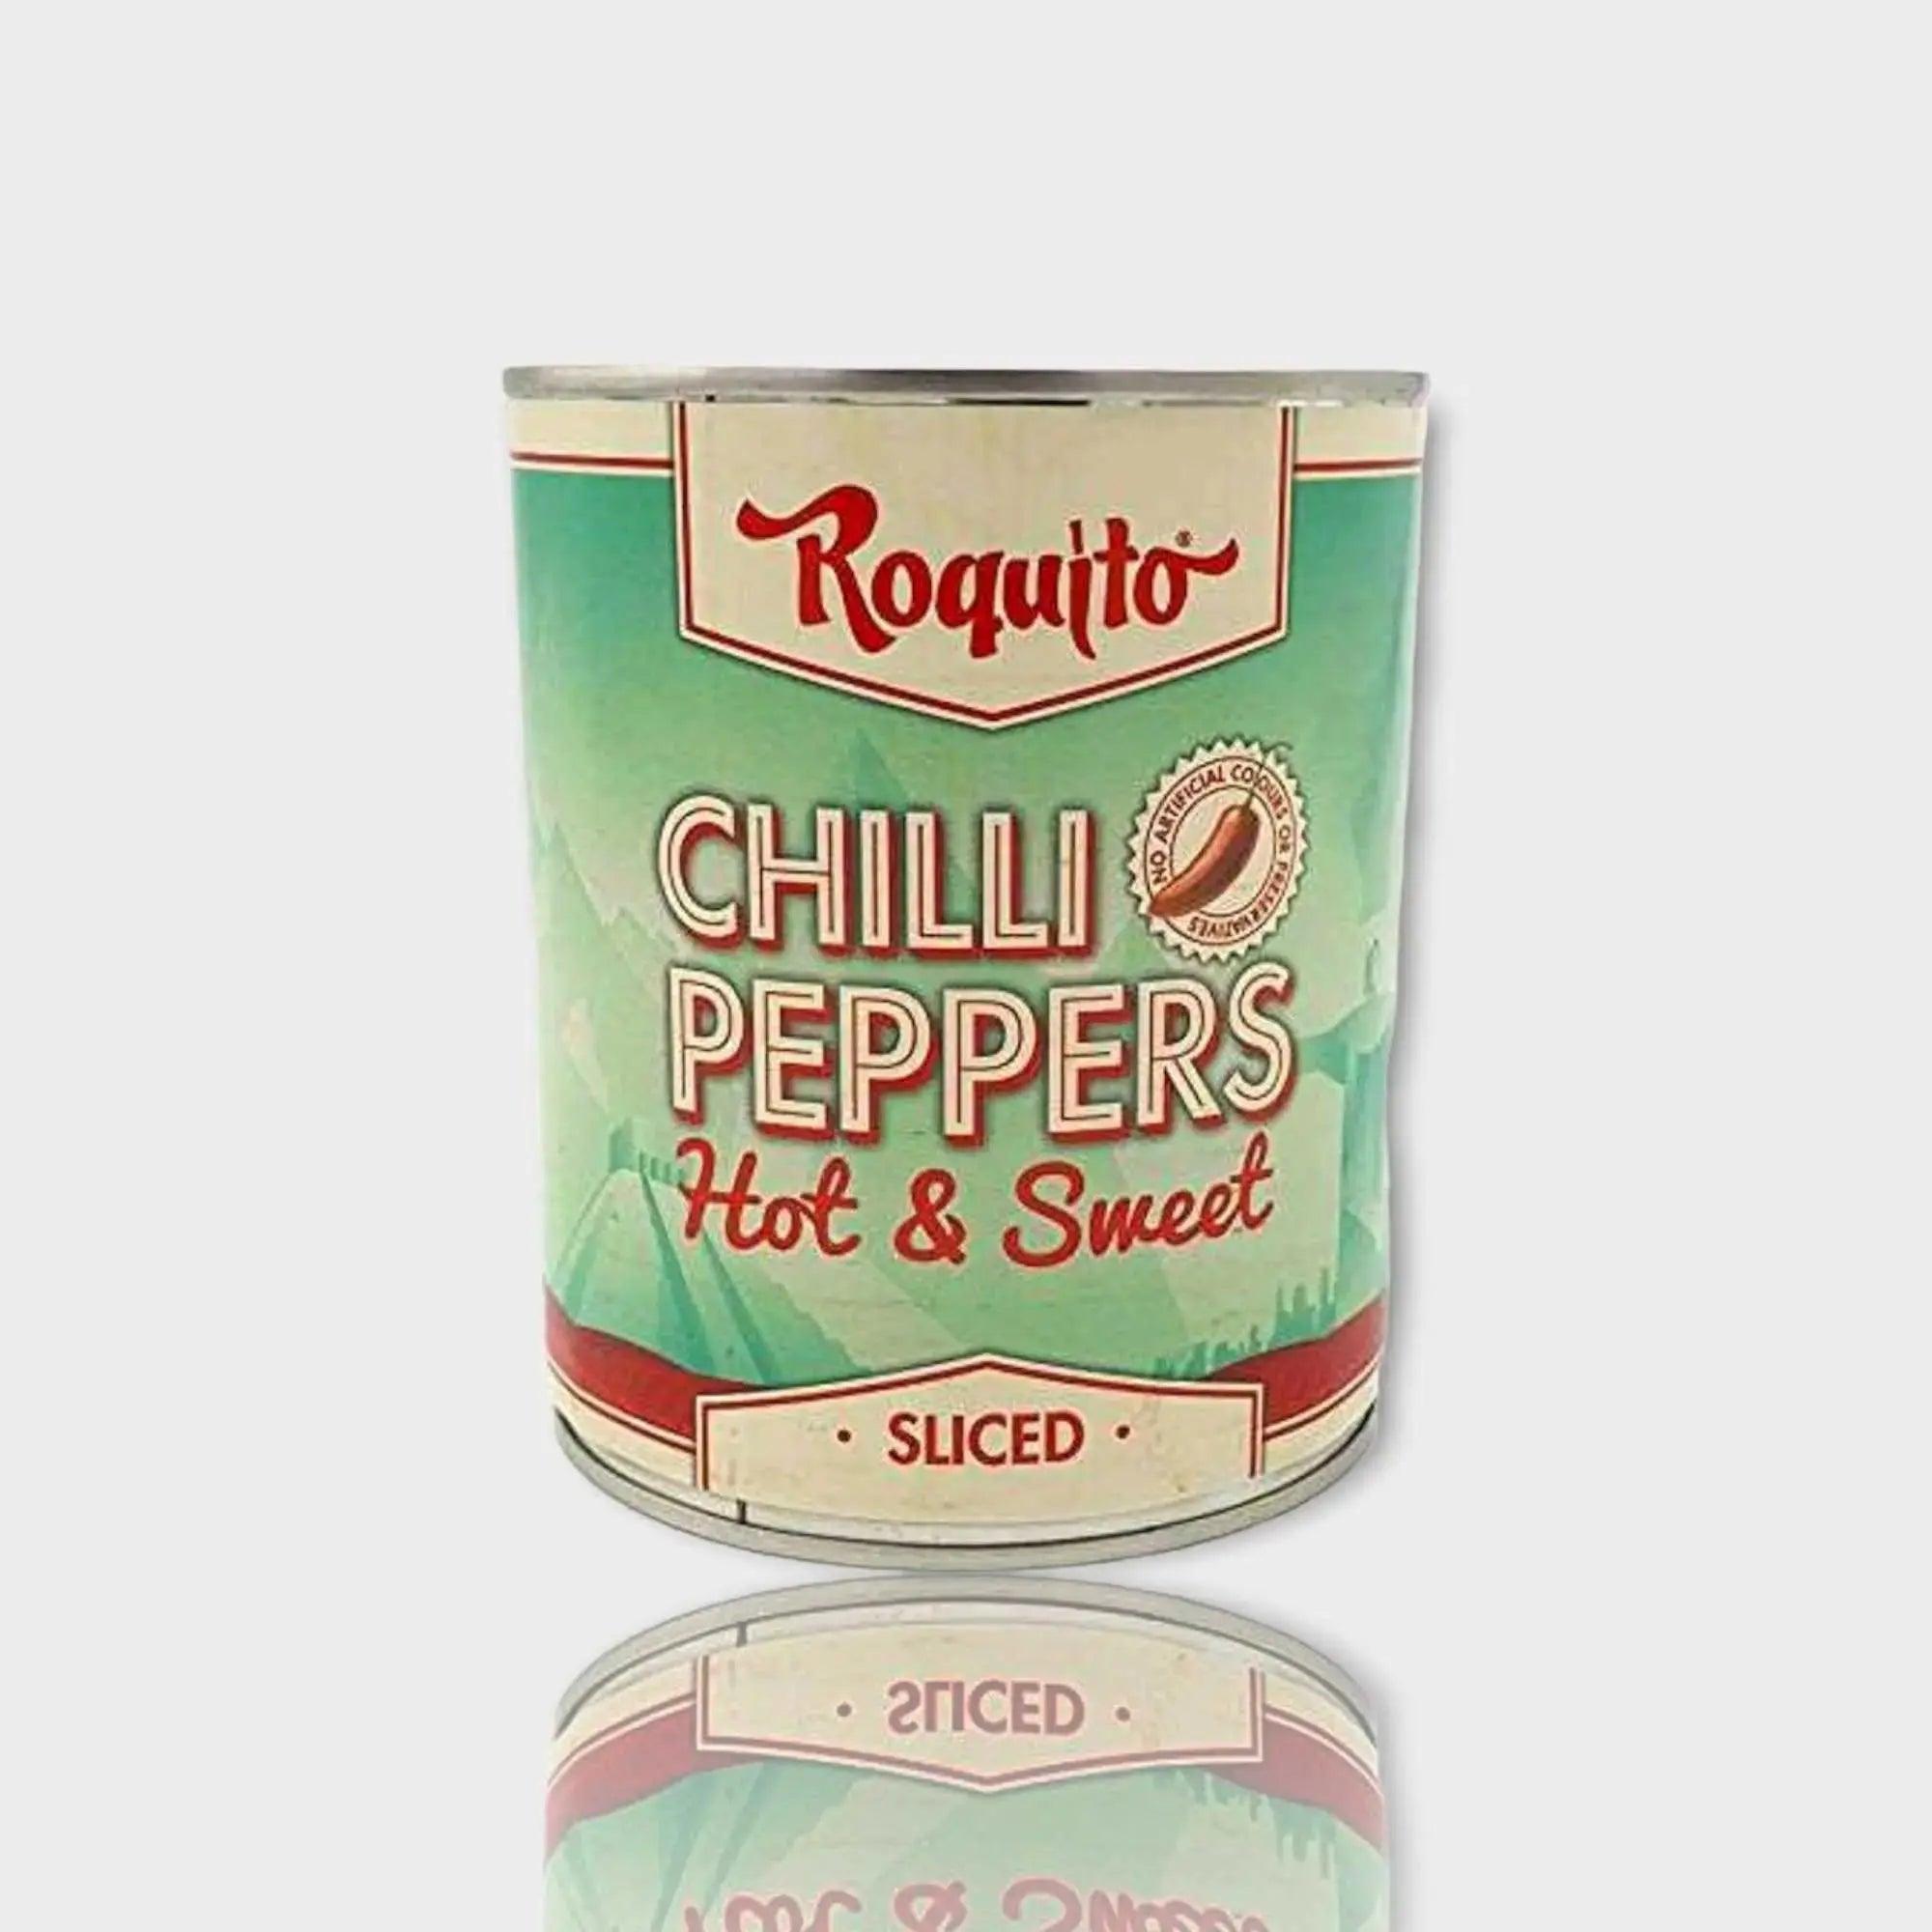 Roquito Chilli Peppers Hot & Sweet Sliced 822 Grams - Honesty Sales U.K